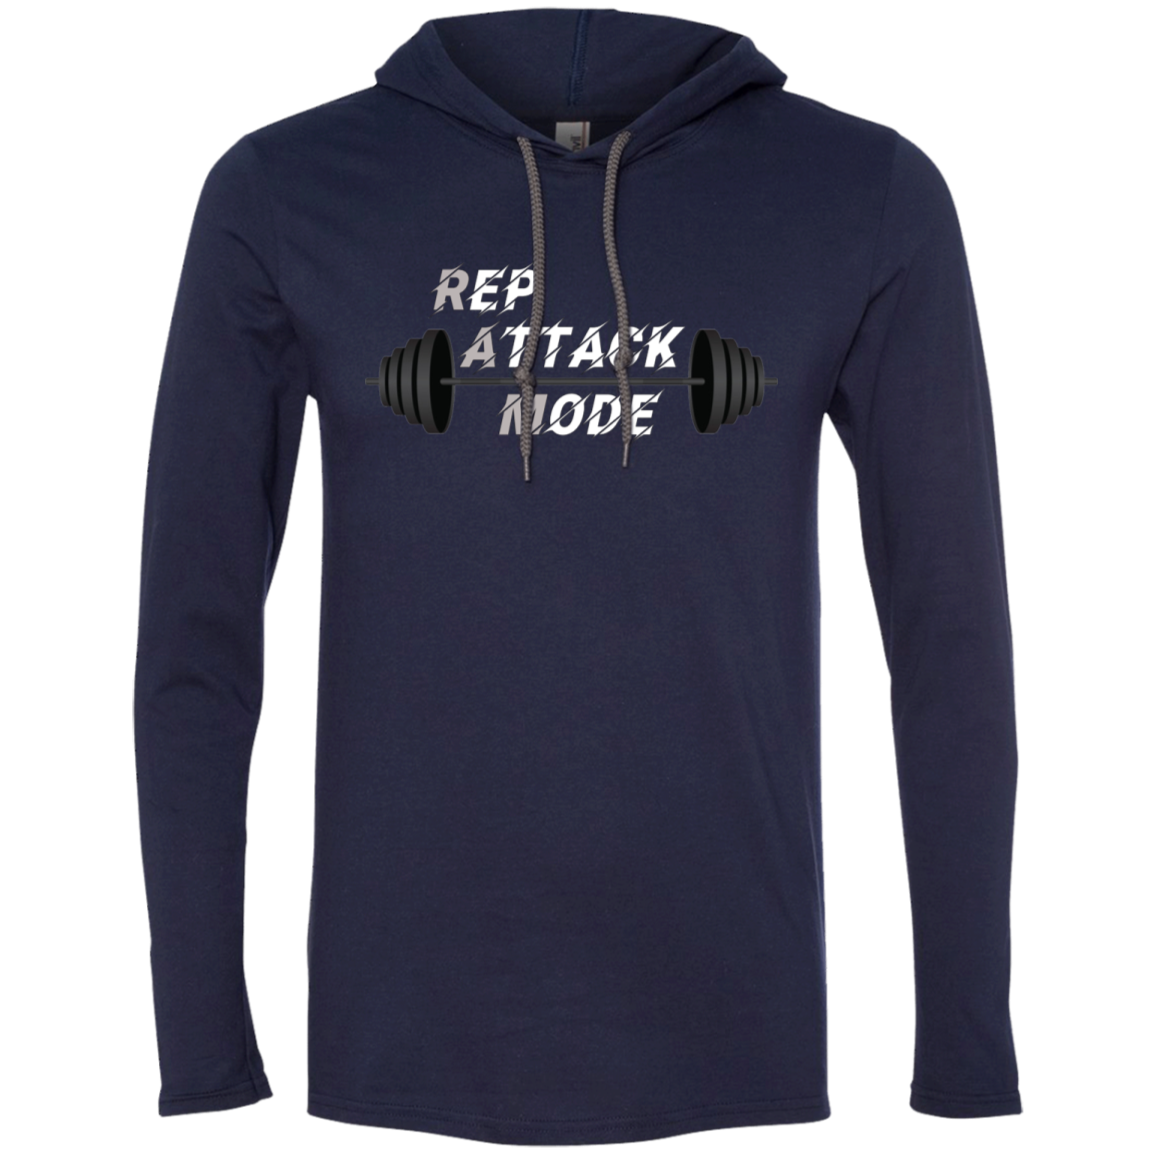 Rep Attack Mode Sports Shirt